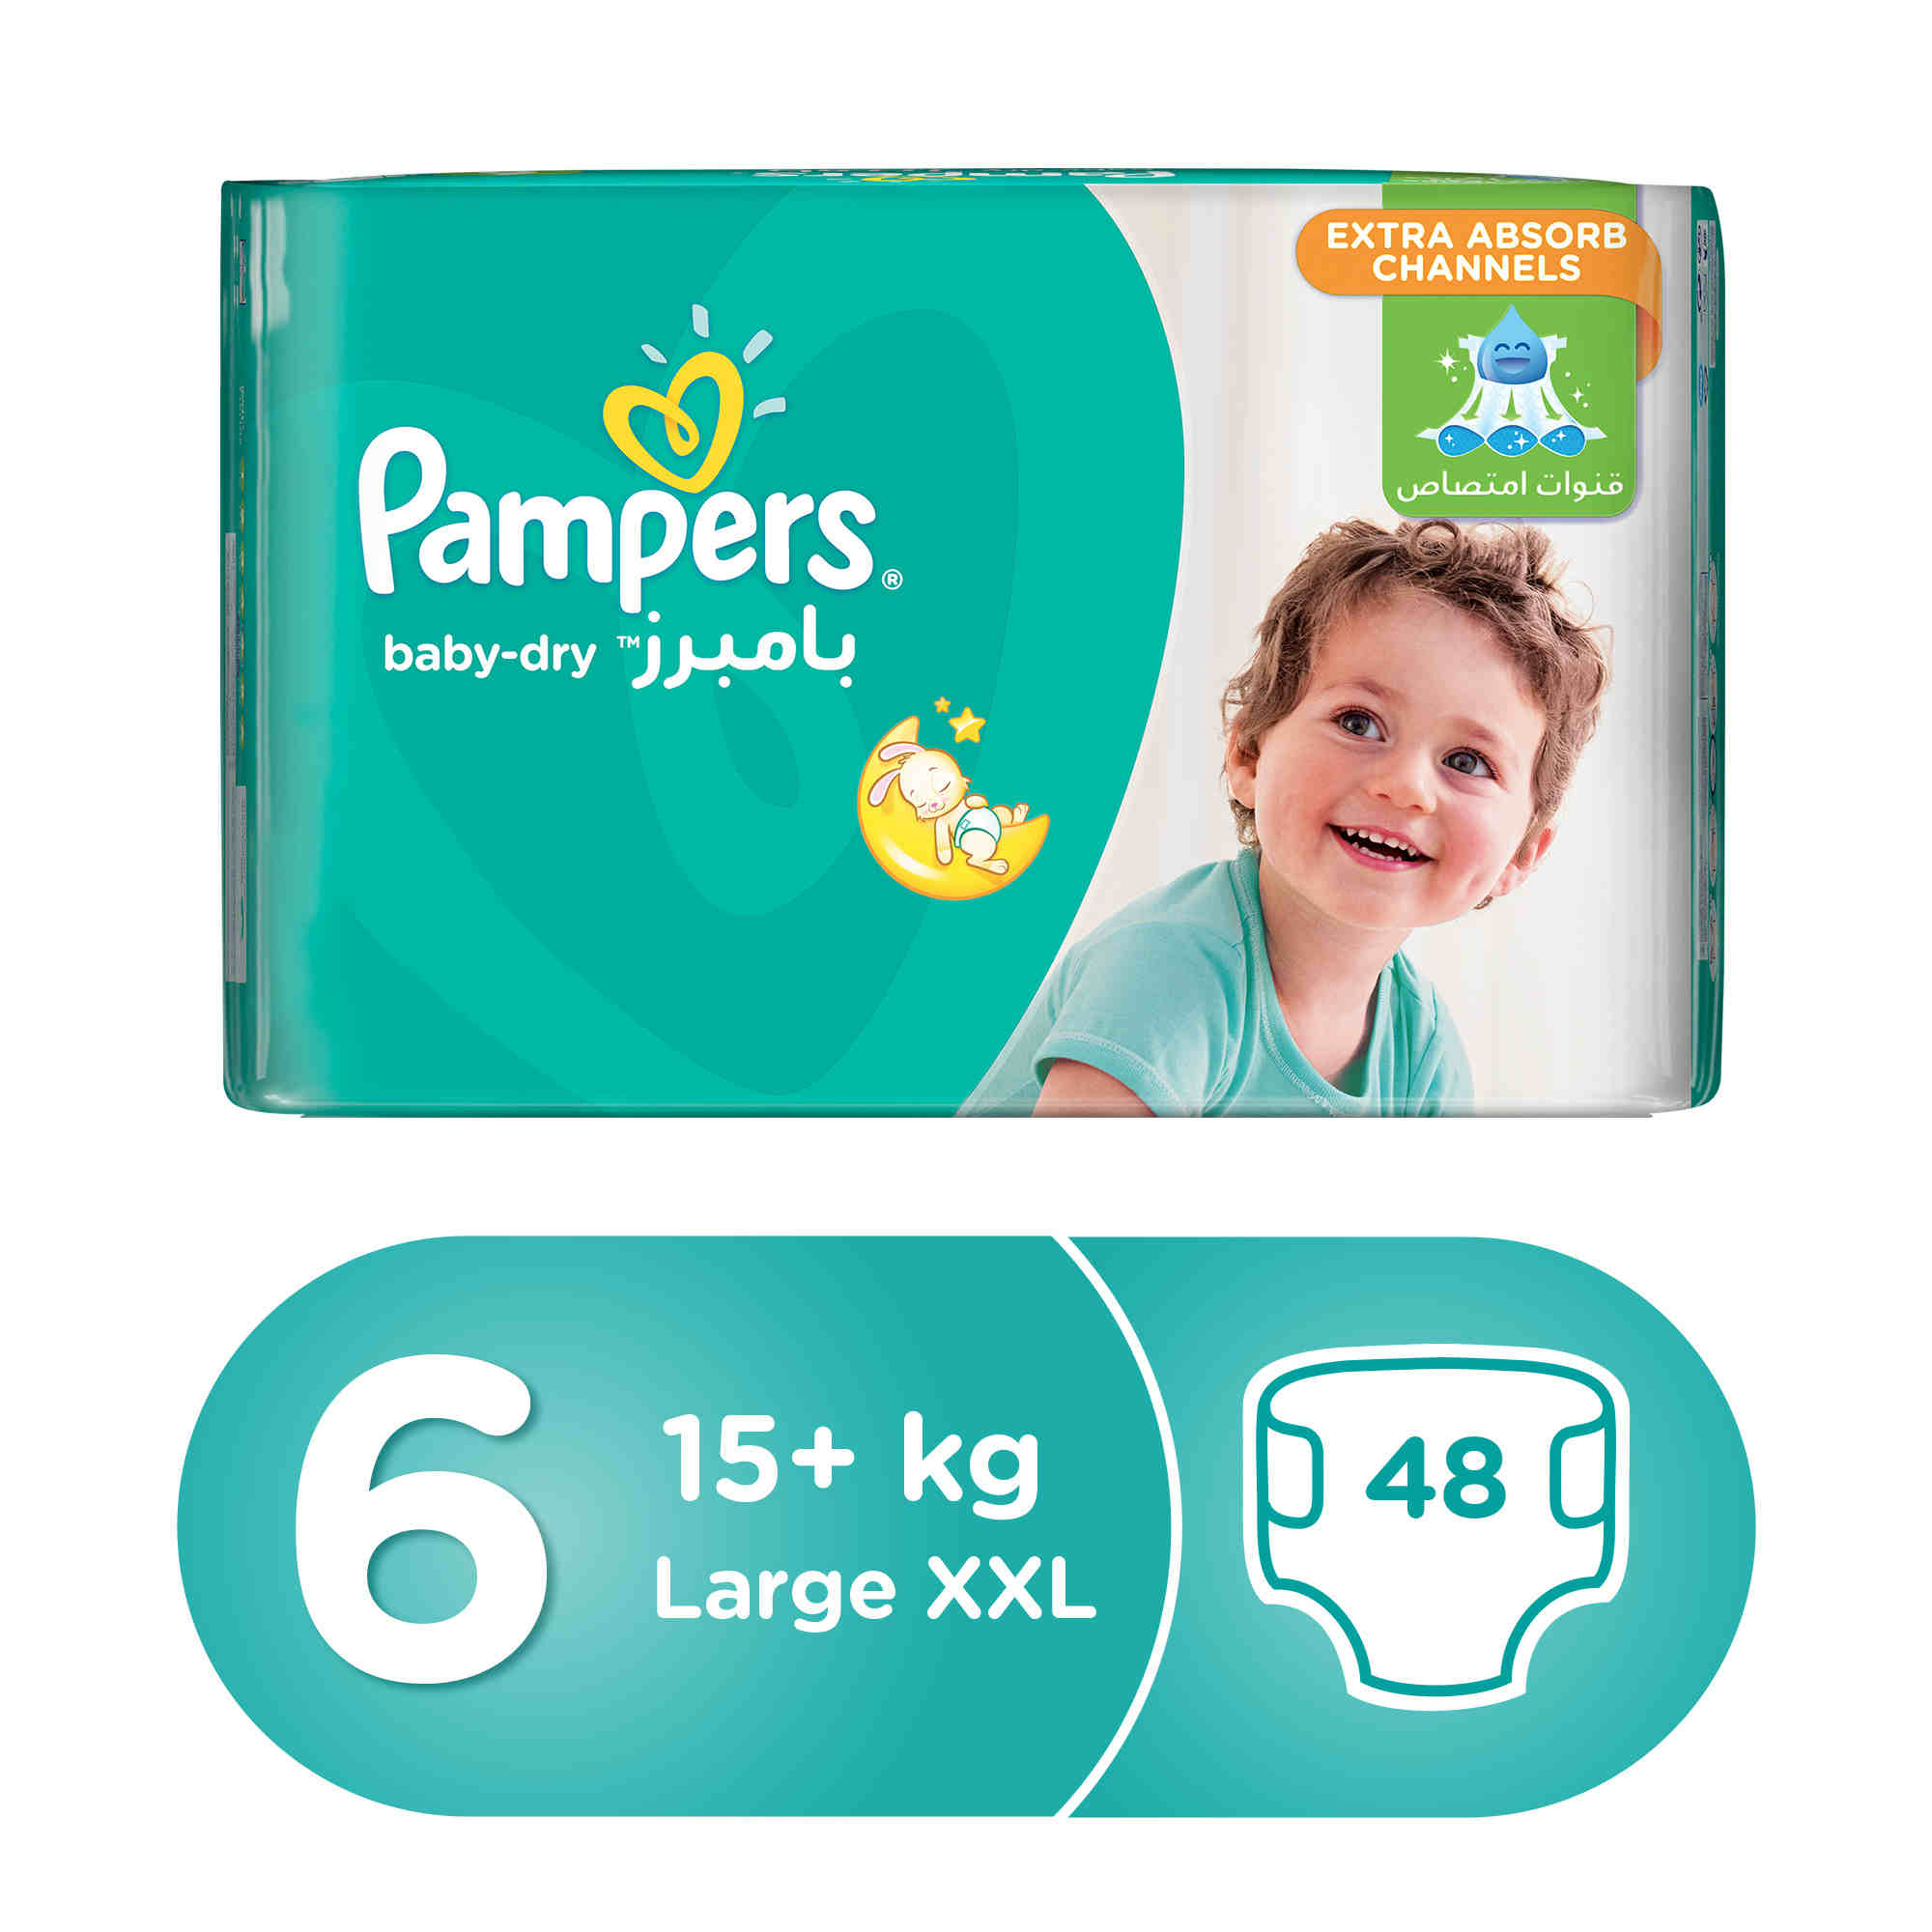 pampers active baby 4 mega pack